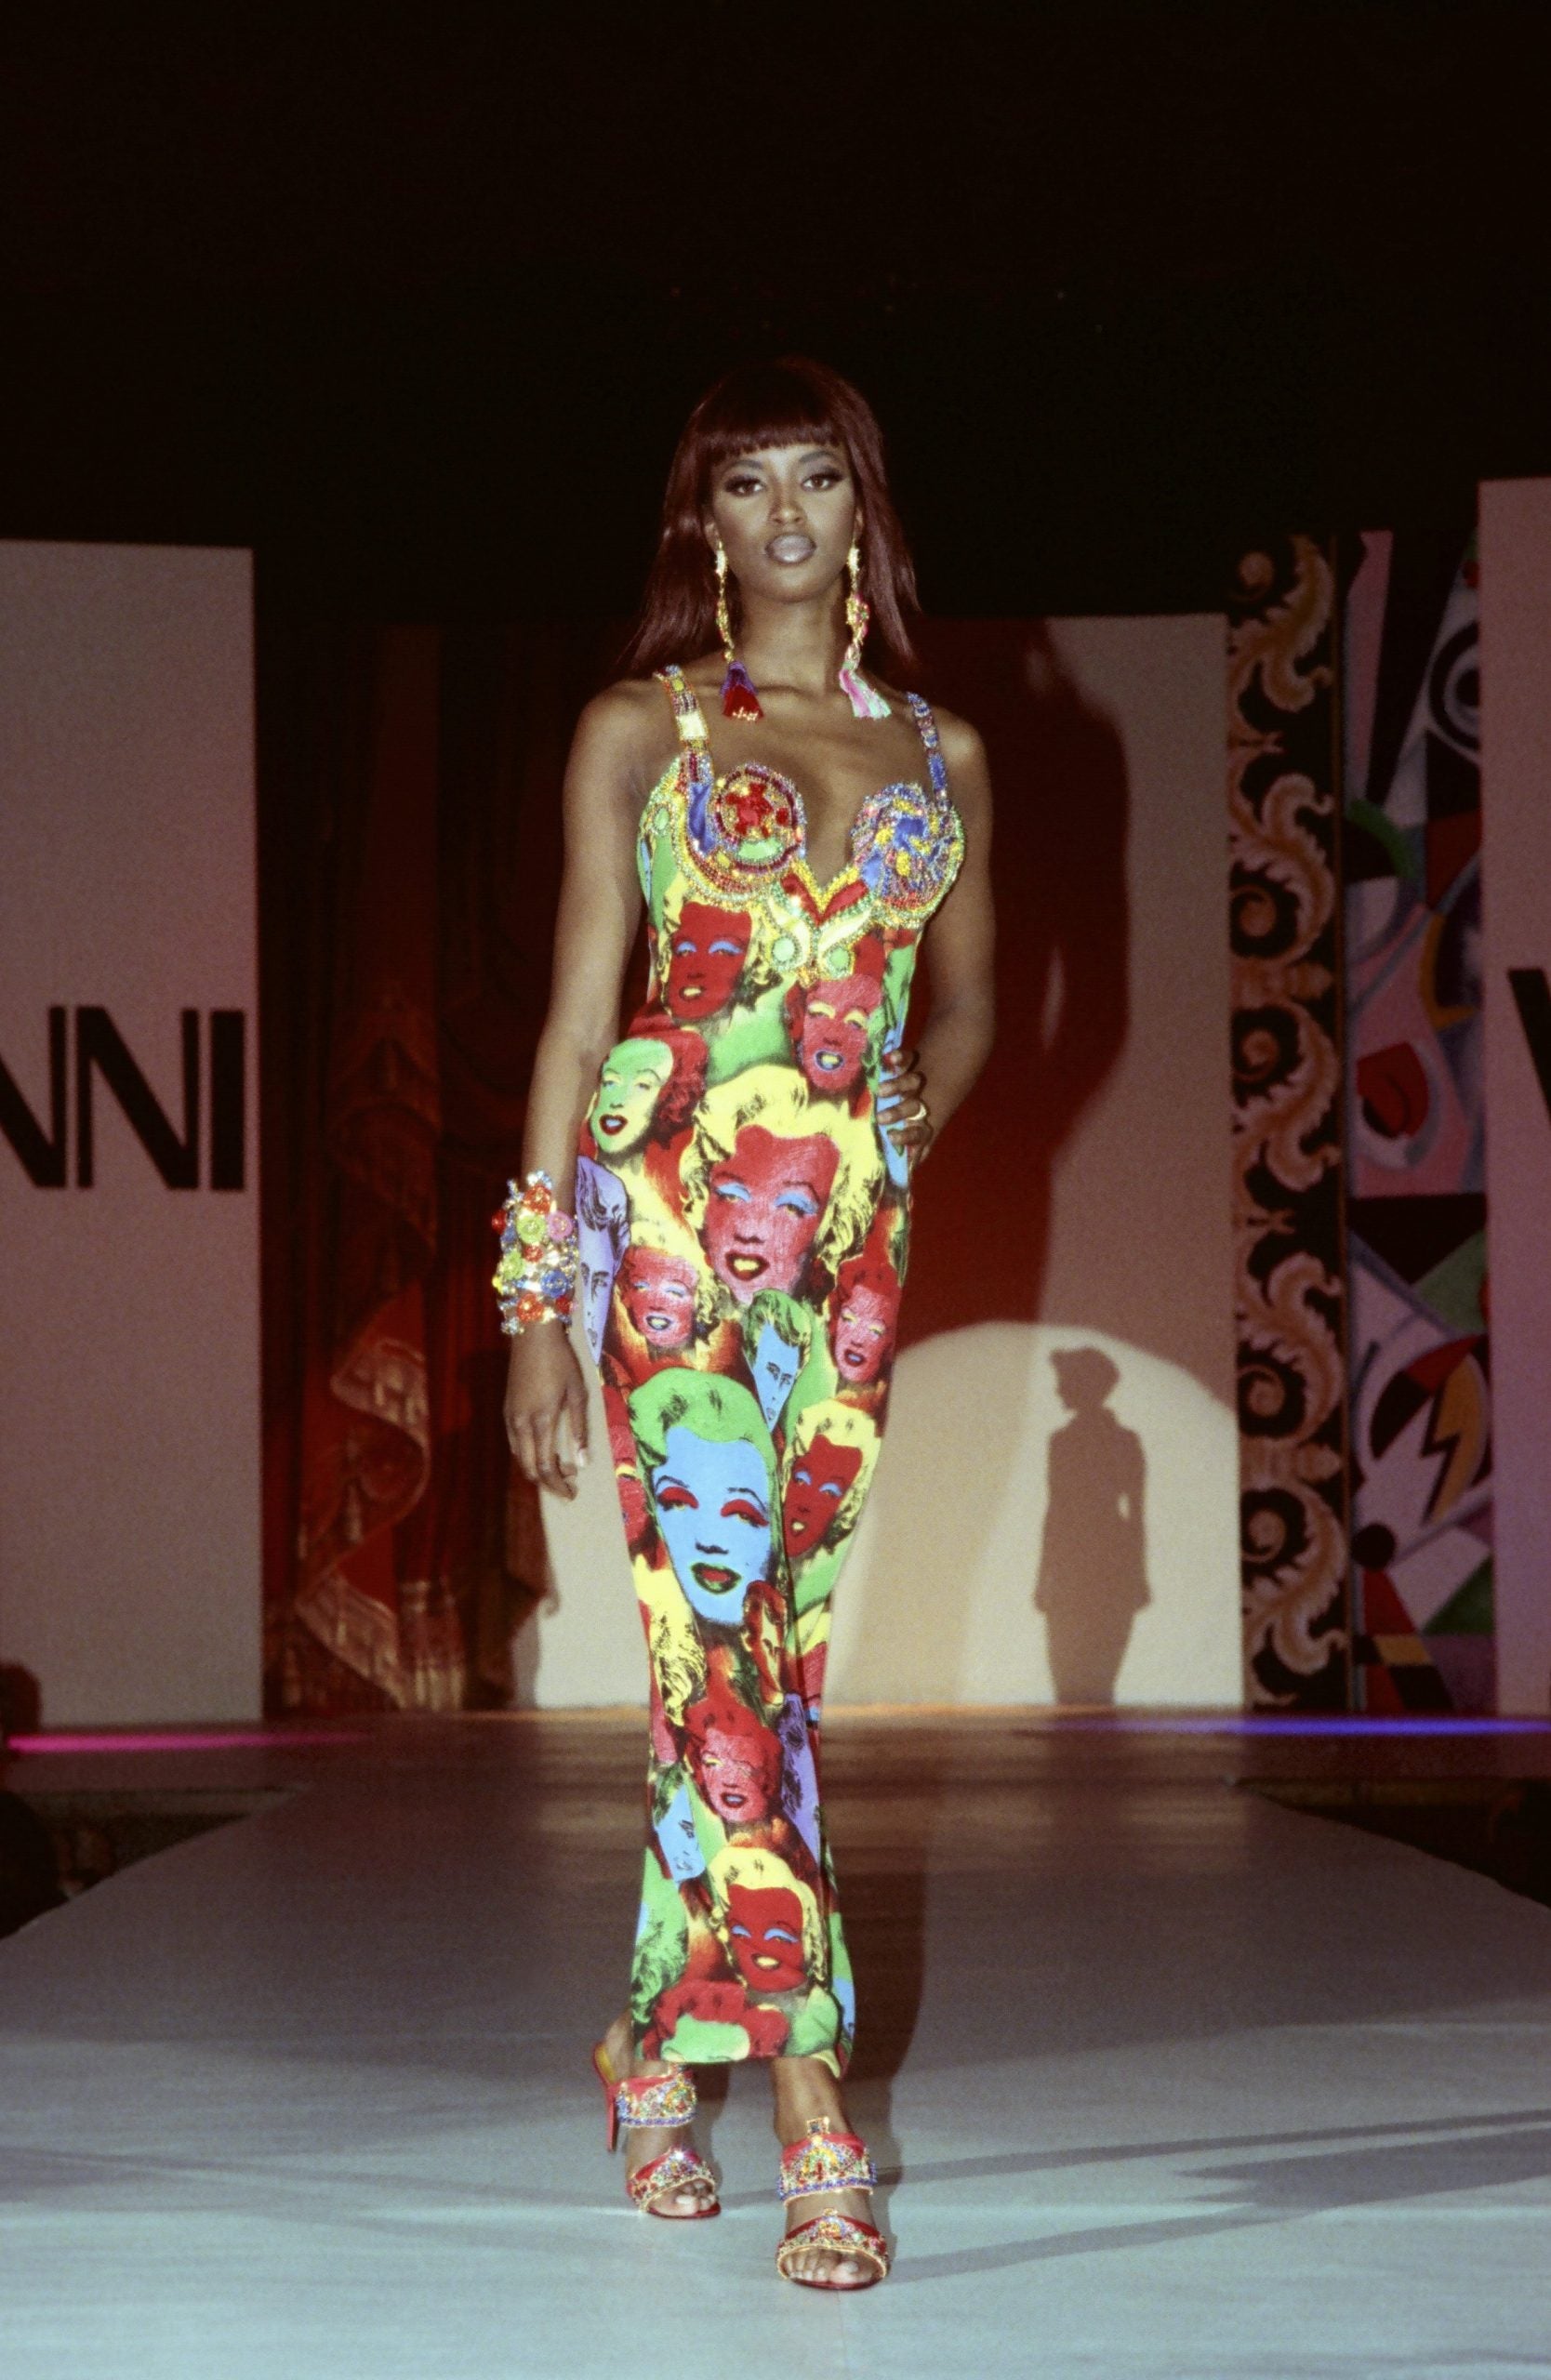 WATCH: Happy Birthday To The Supermodel Of The World, Naomi Campbell ...